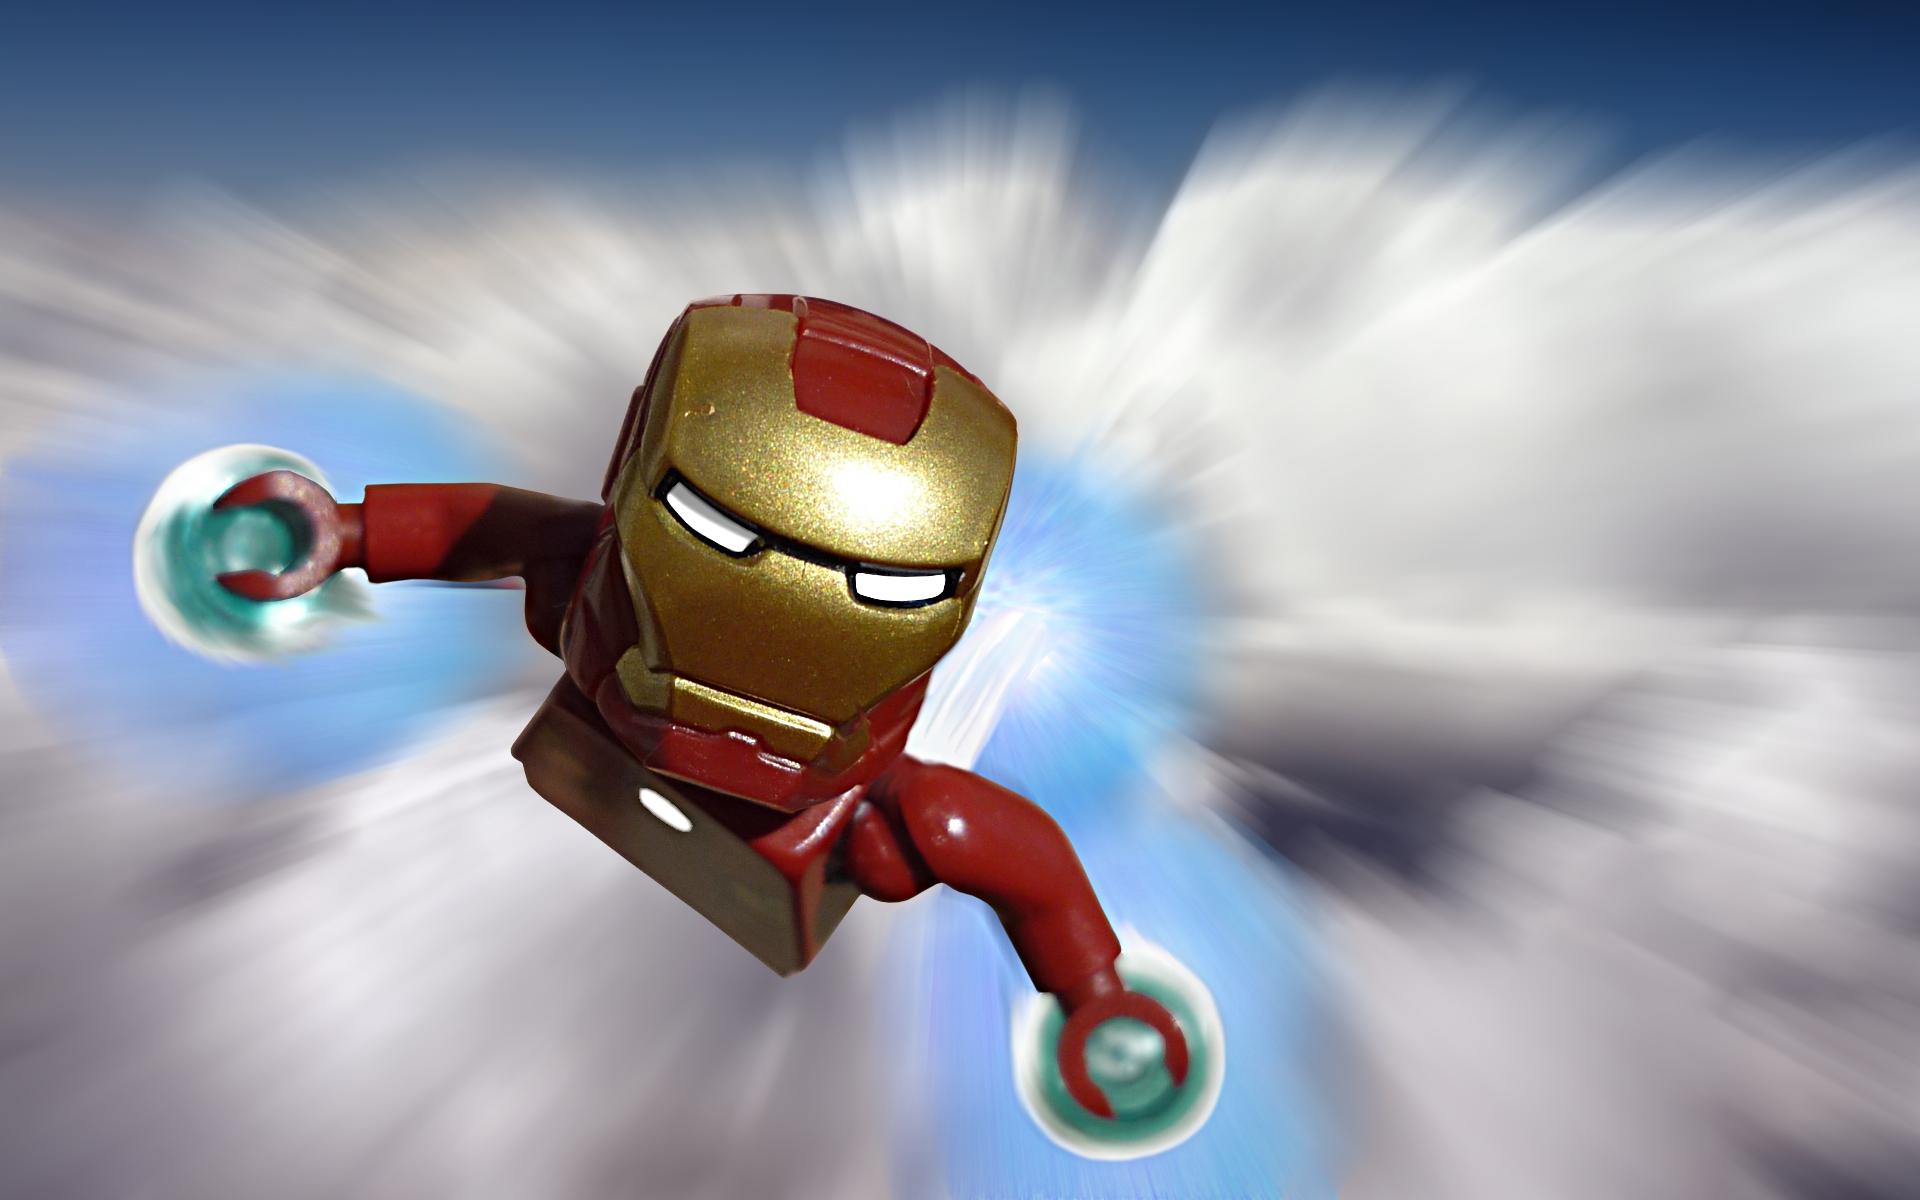 Wallpaper, space, sky, LEGO, technology, Toy, marvel, ironman